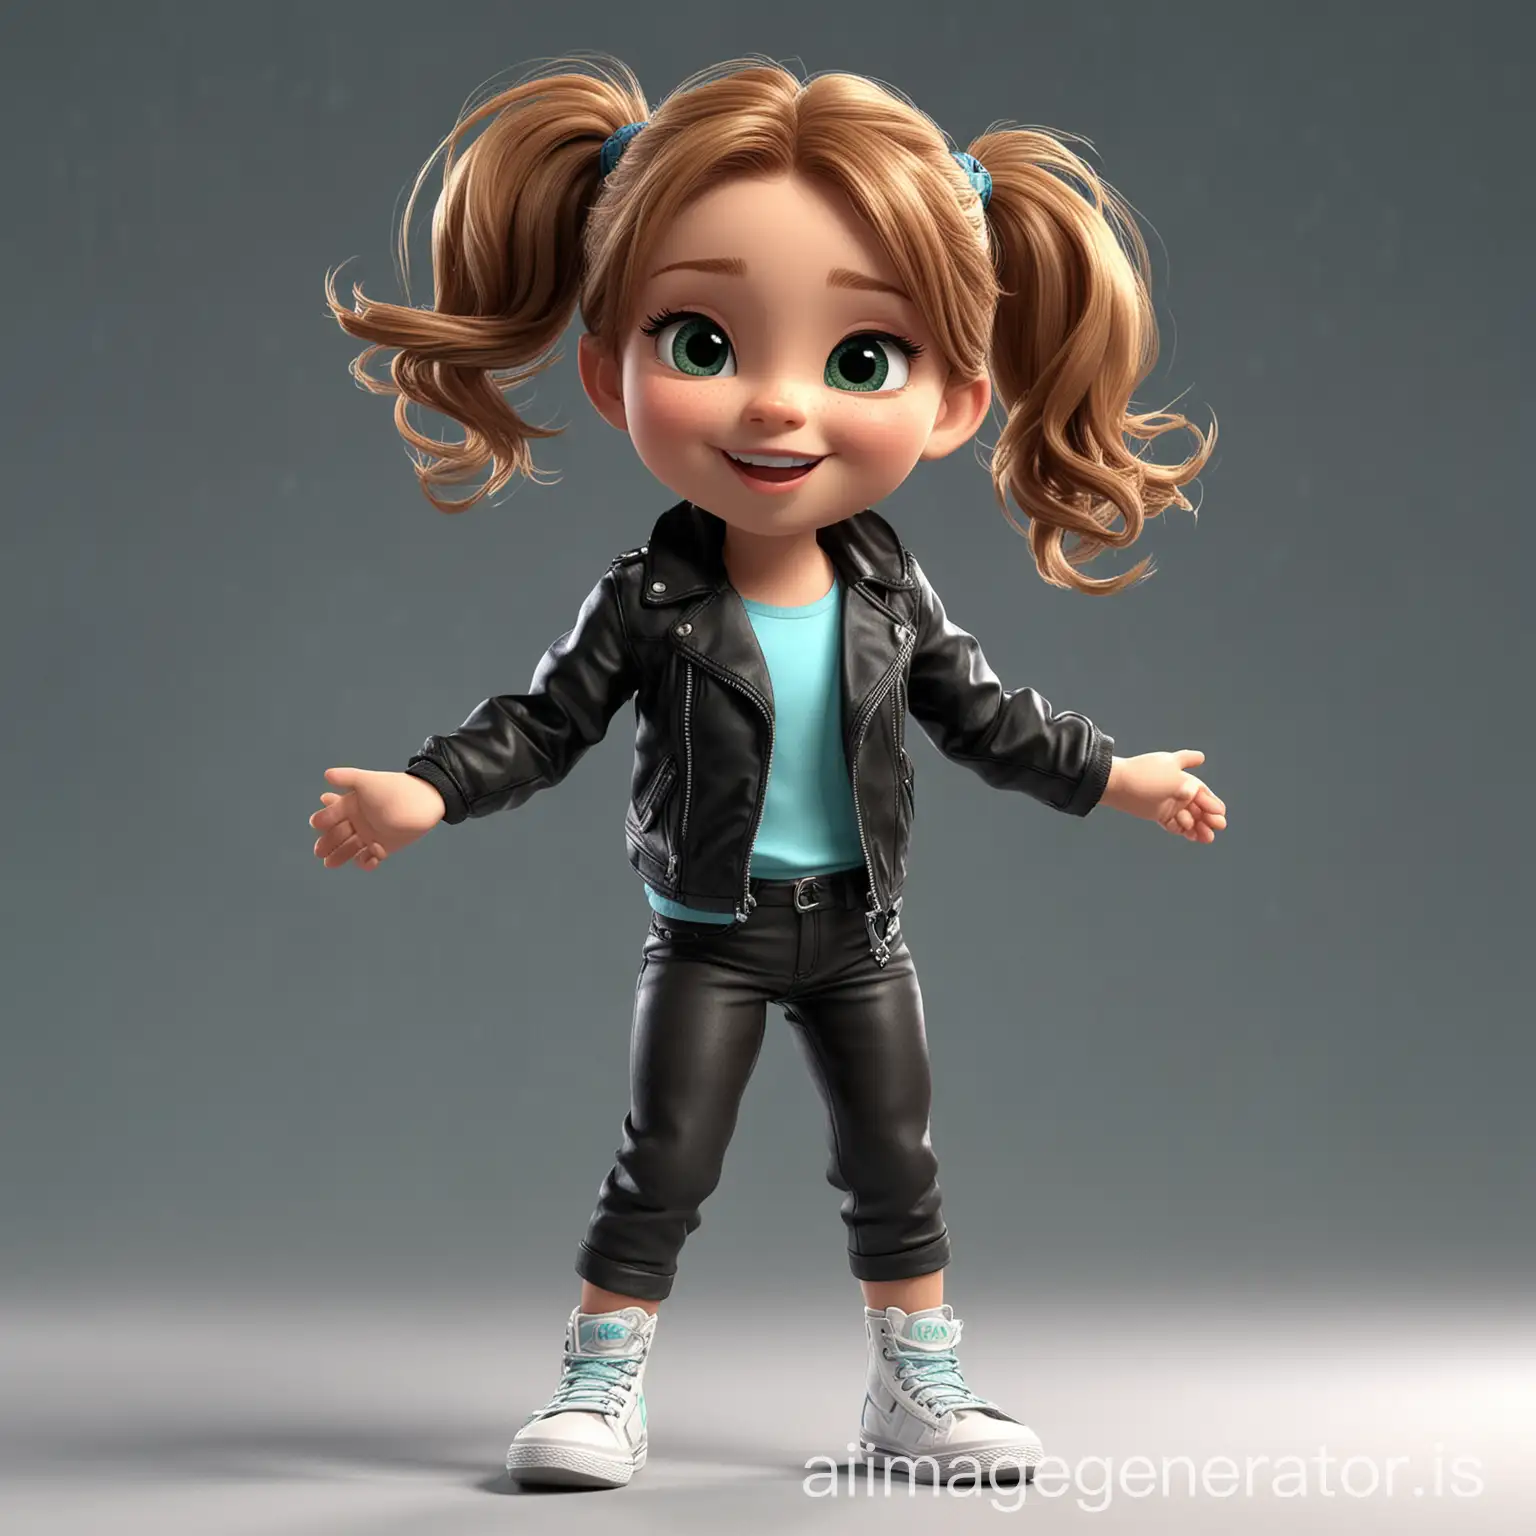 8YearOld-Girl-Dancing-in-Leather-Jacket-and-Pants-on-Stage